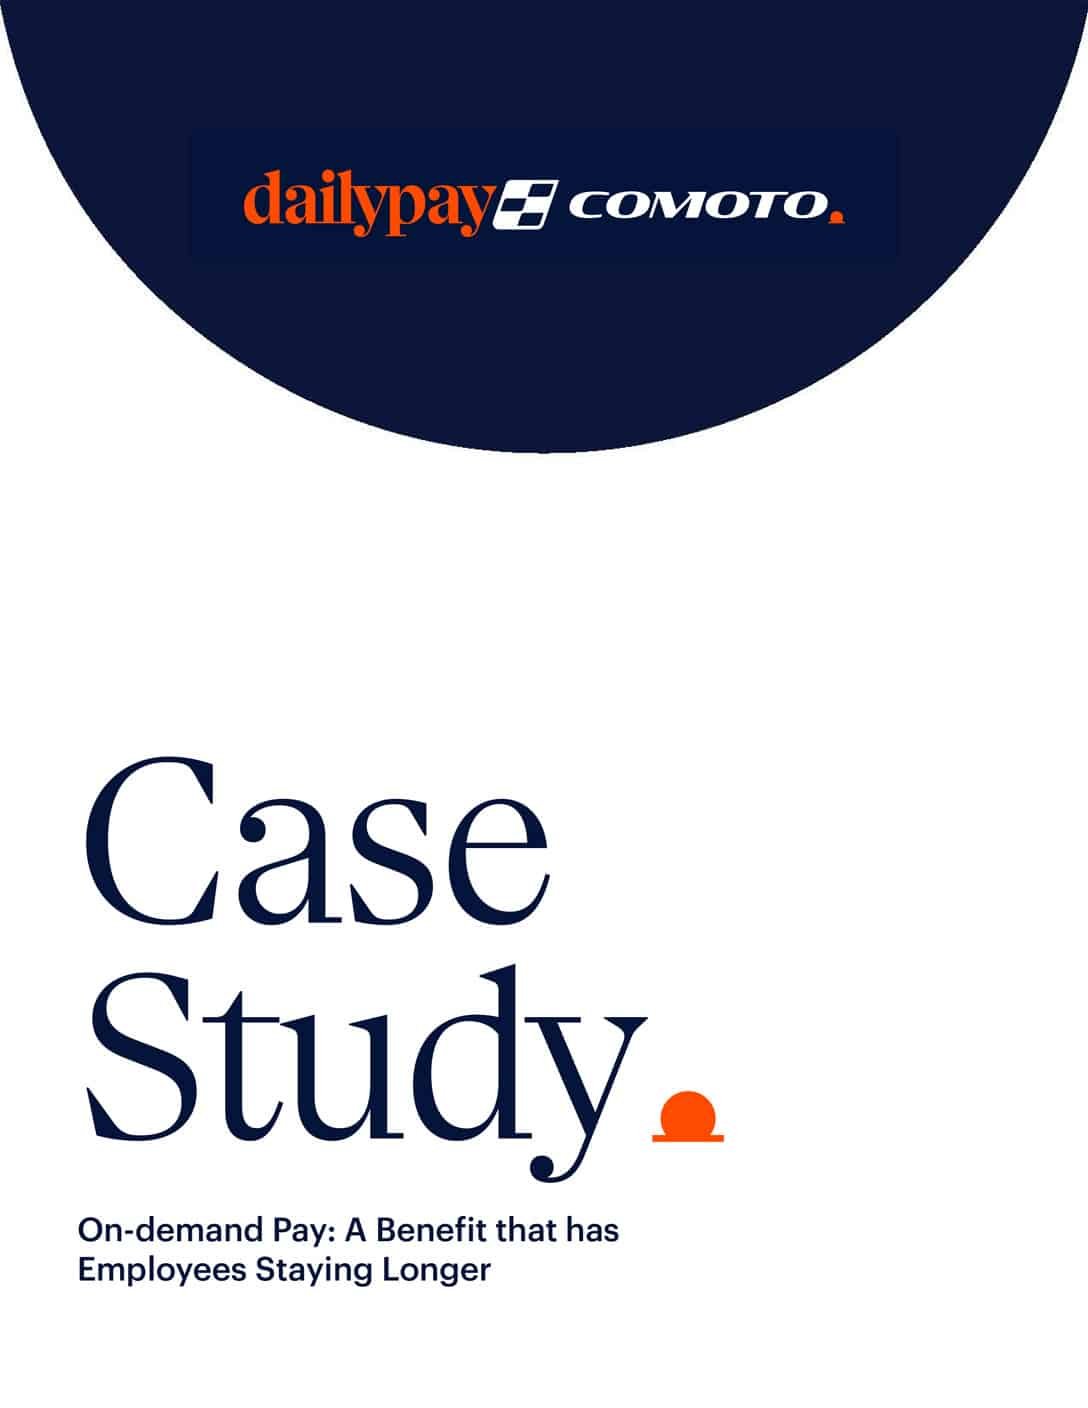 The image shows a cover page of a case study document. At the top, there is a navy blue background with the logos of DailyPay and Comoto. Below this, in large navy blue text, the document title reads "Case Study." Underneath, it says "On-demand Pay: A Benefit that has Employees Staying Longer" in smaller navy blue text.